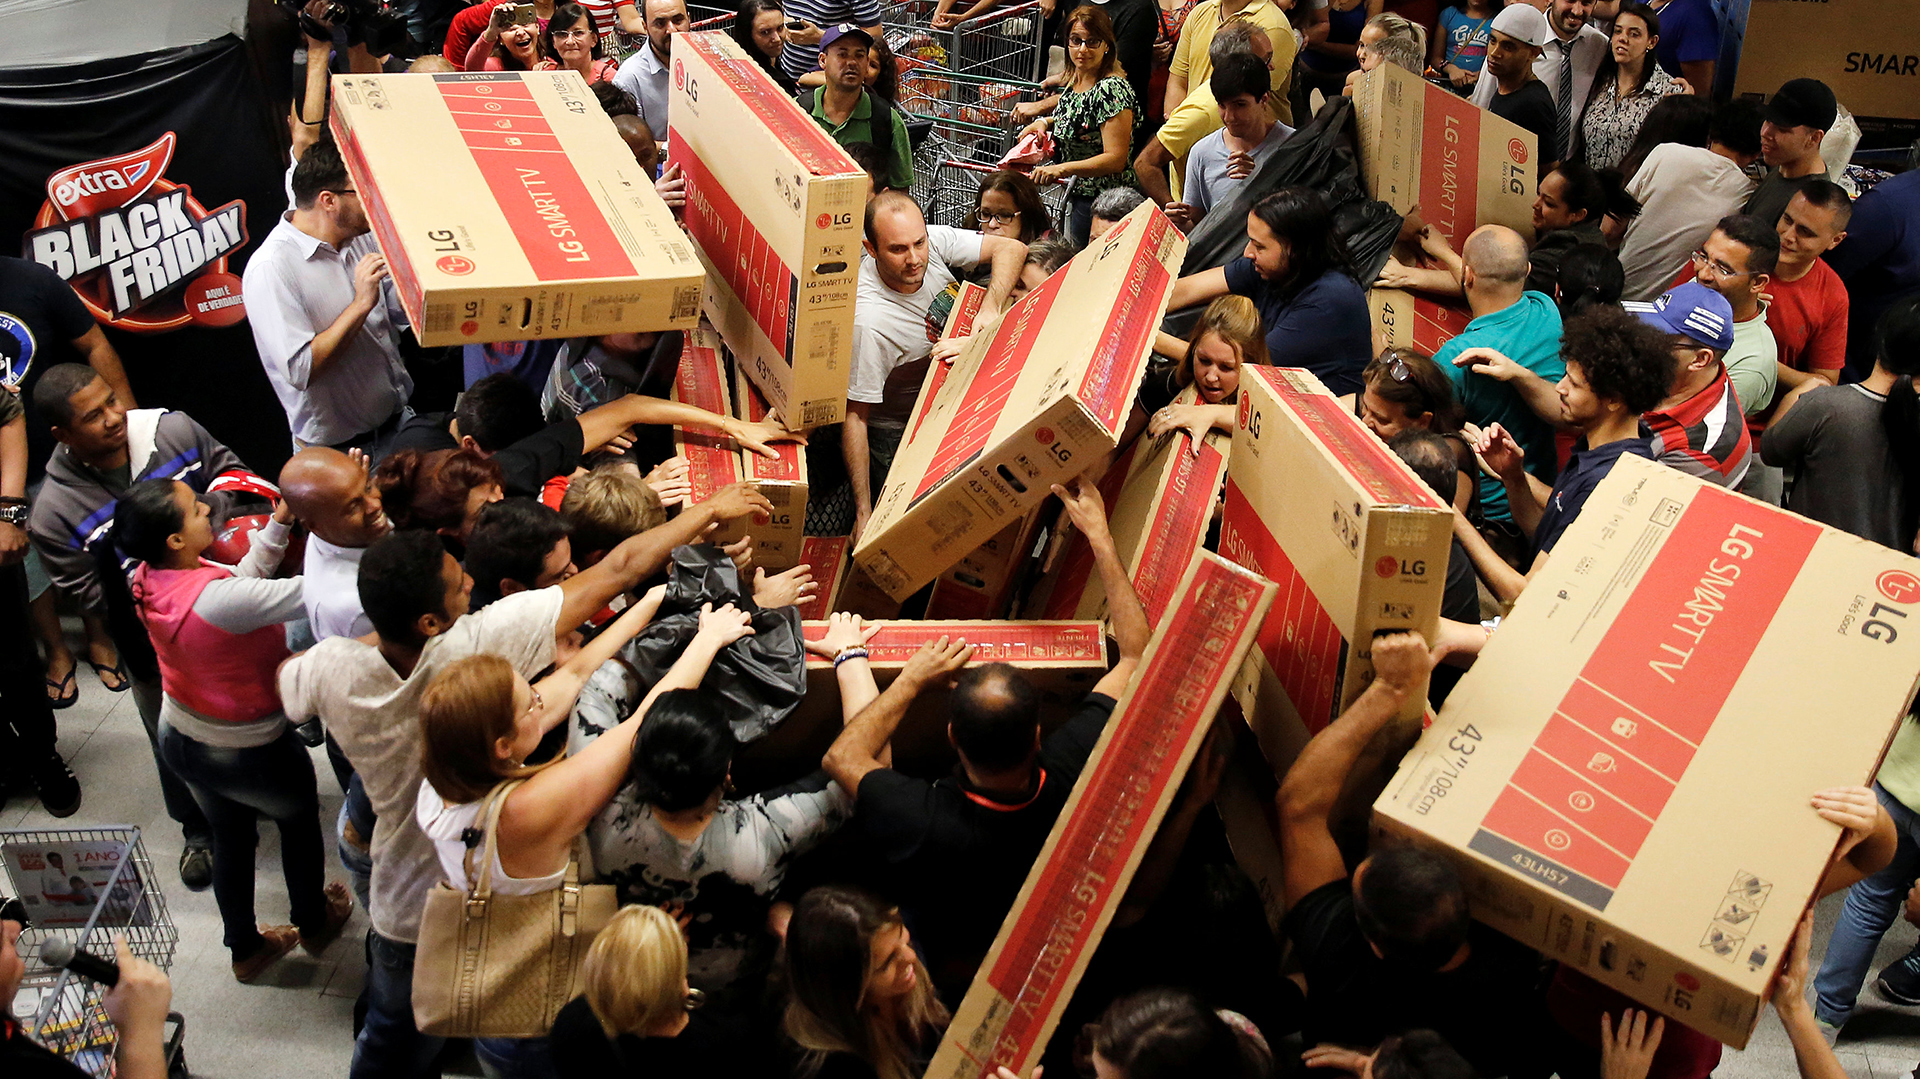 Shoppers reach for television sets as they compete to purchase retail items on Black Friday at a store in Sao Paulo, Brazil, November 24, 2016. REUTERS/Nacho Doce